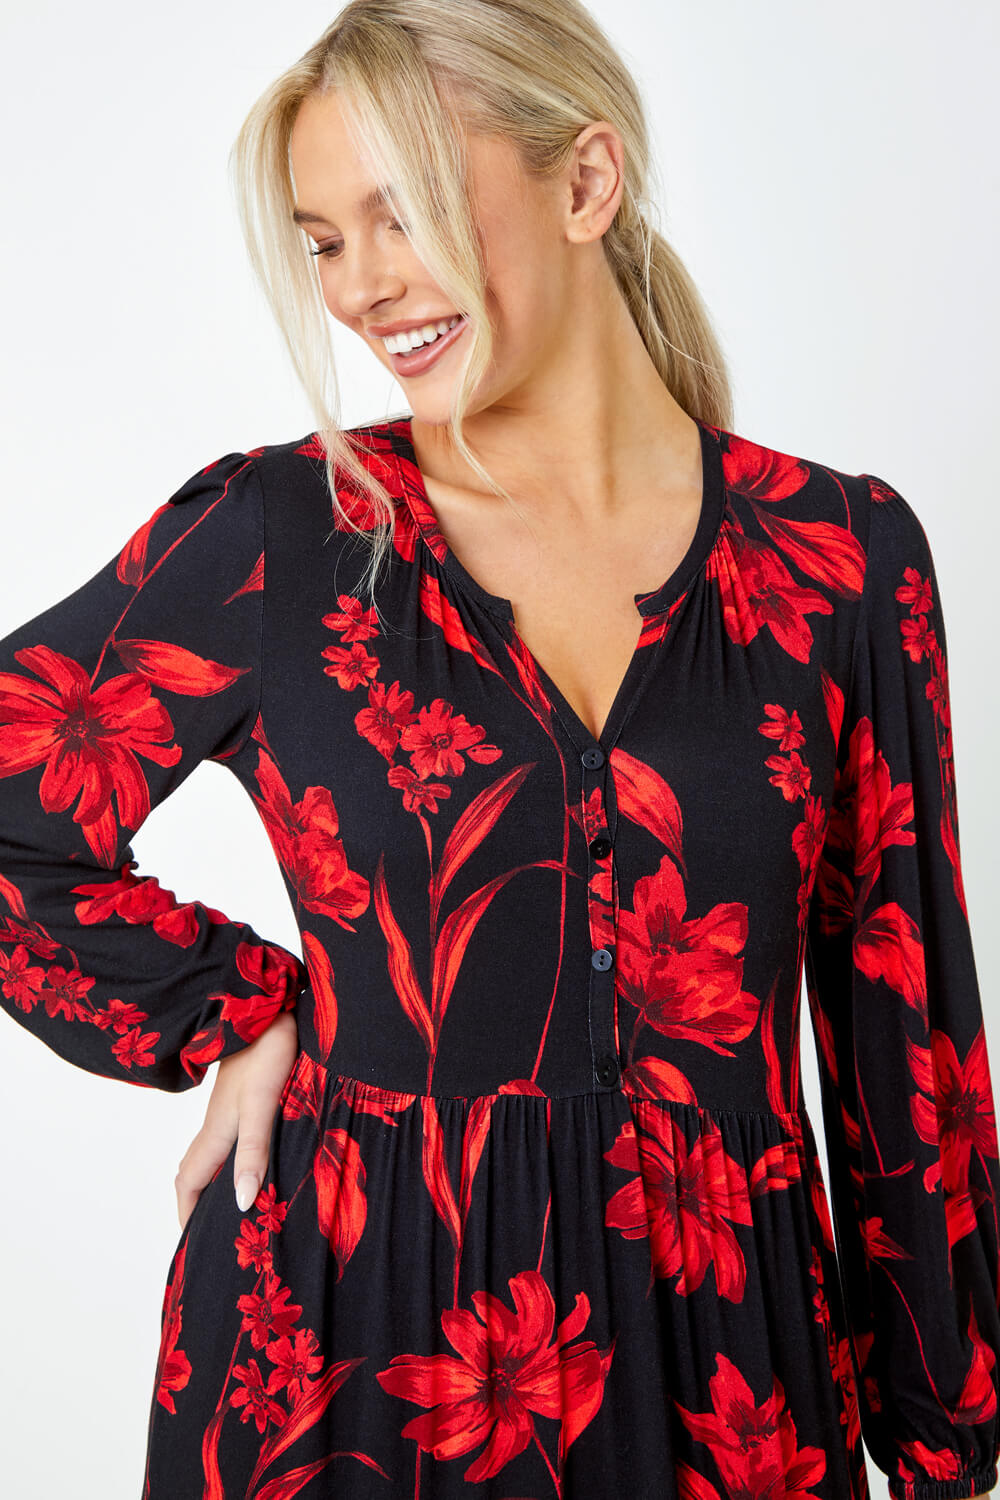 Red Petite Floral Print Tiered Stretch Dress, Image 4 of 5